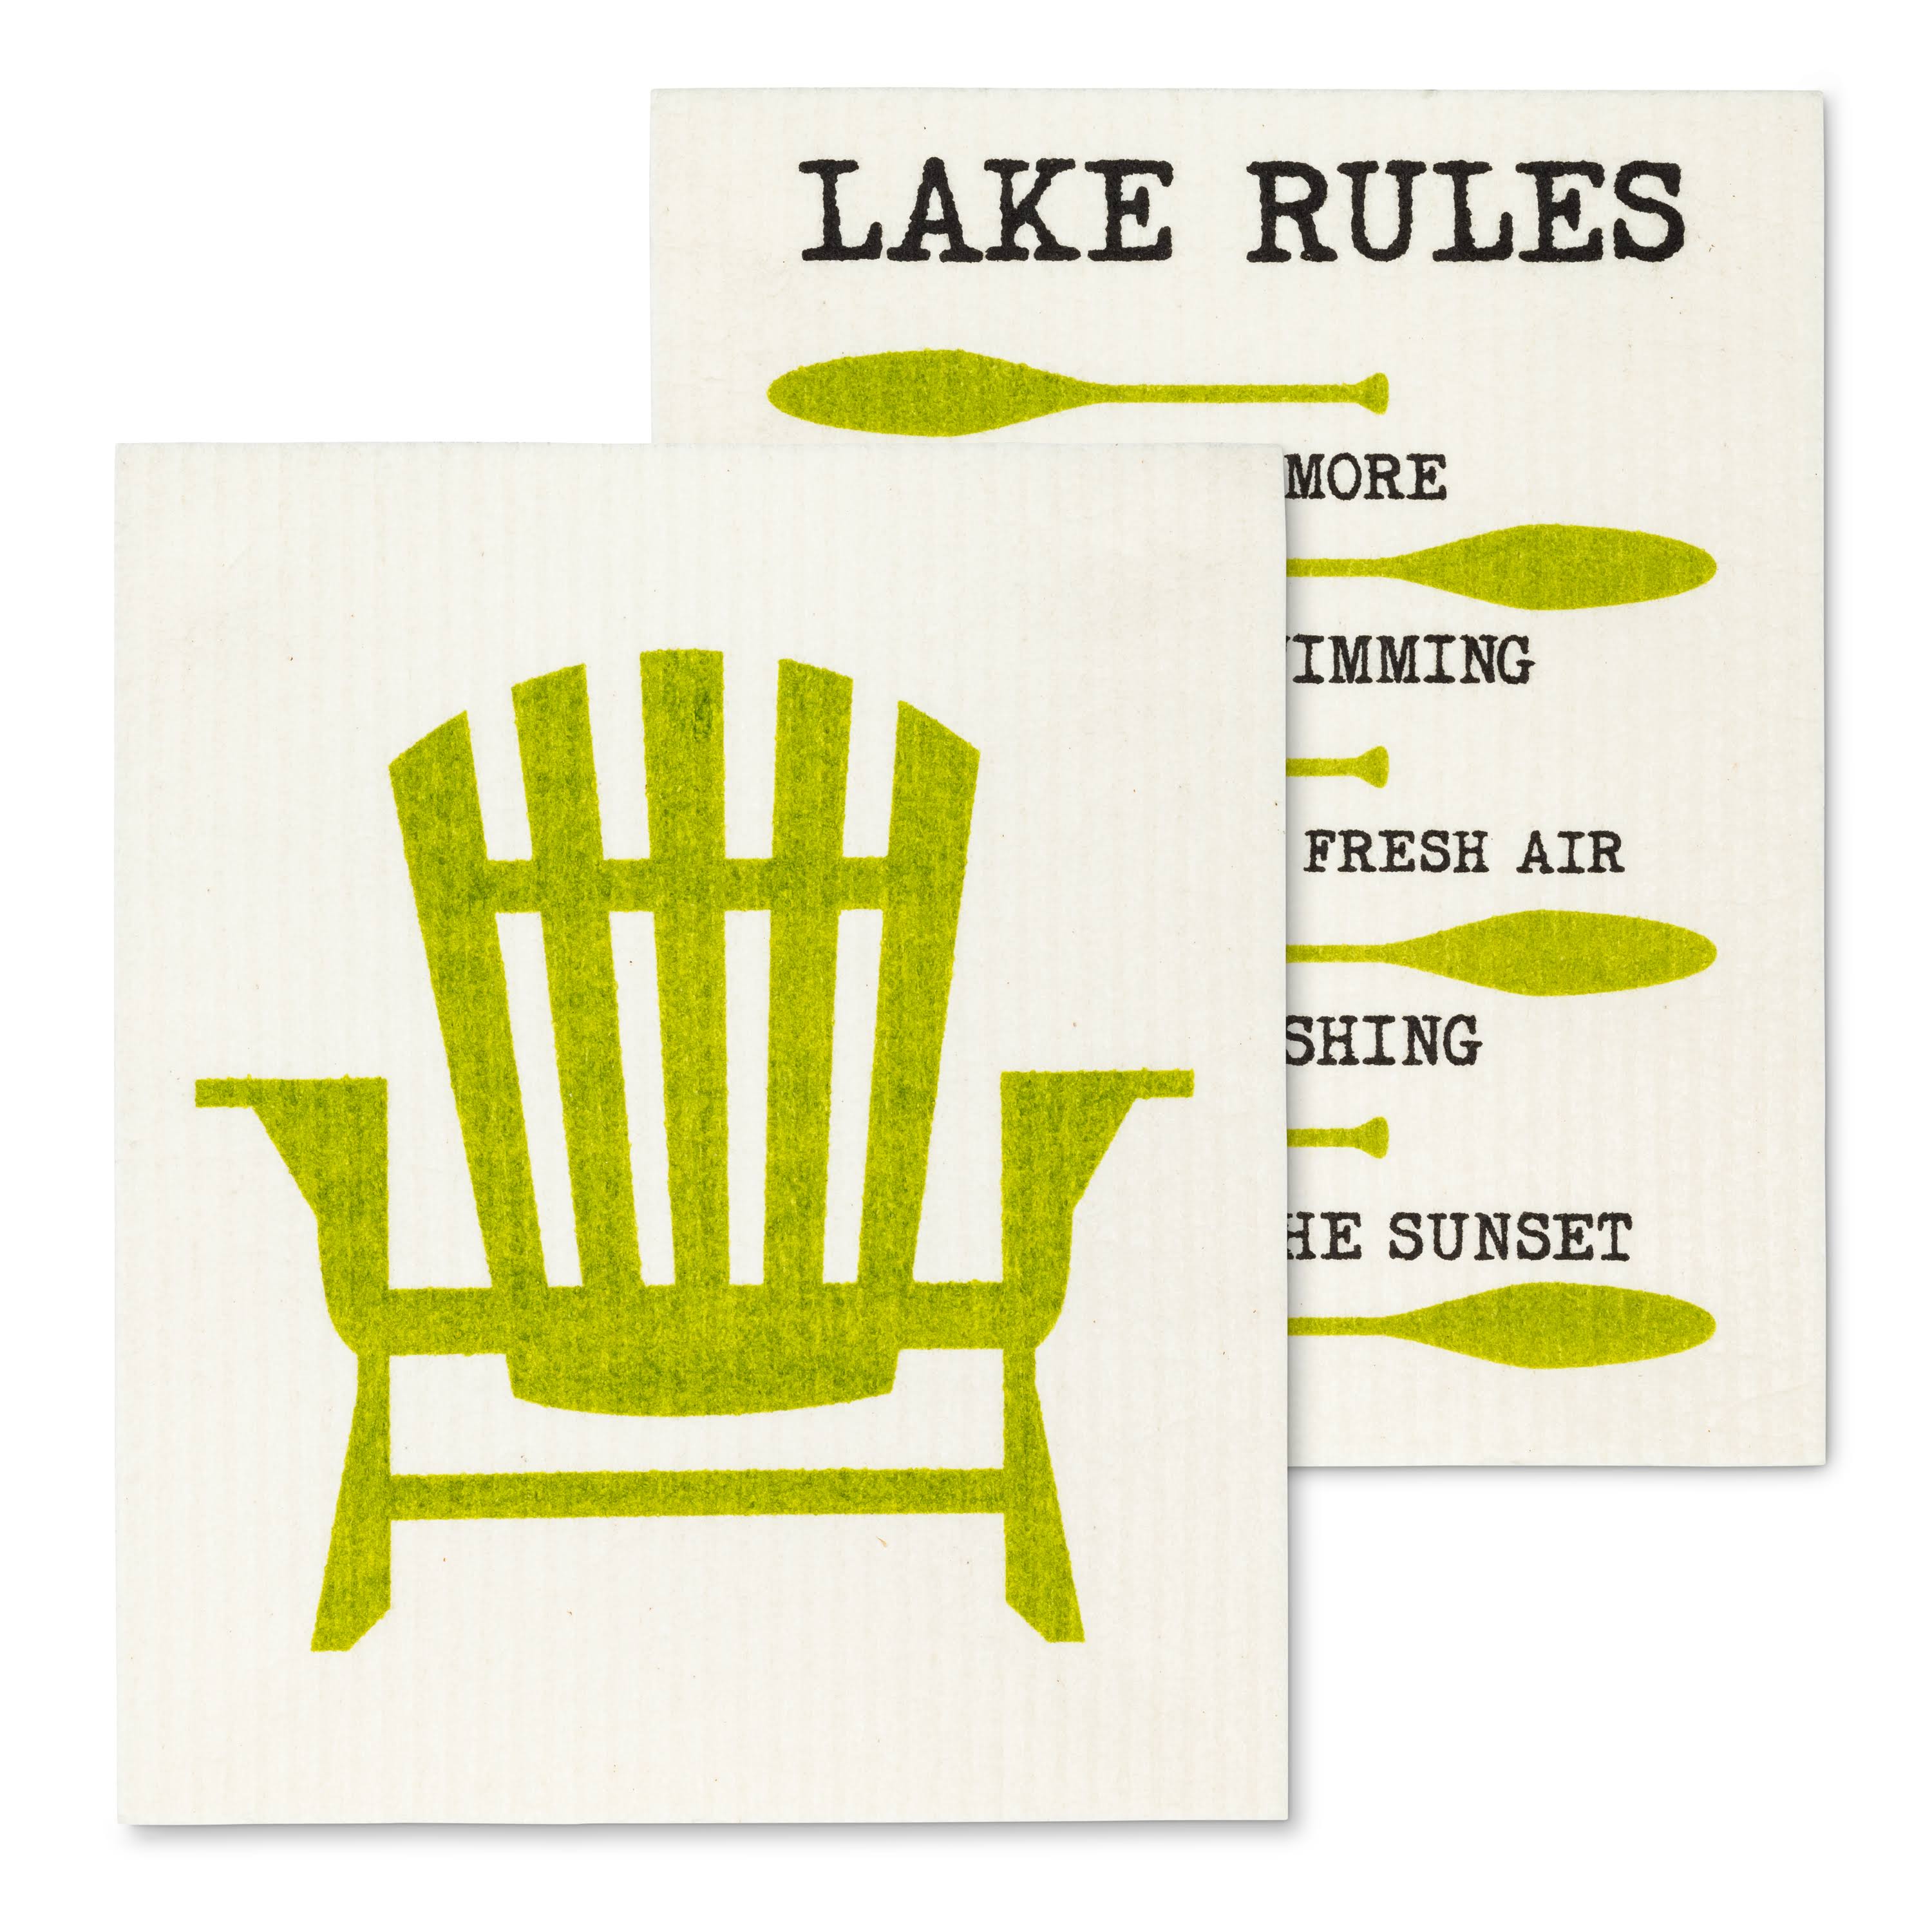 Abbott Collection S 2 Chair Rules Dish Cloth 6 5x8 L